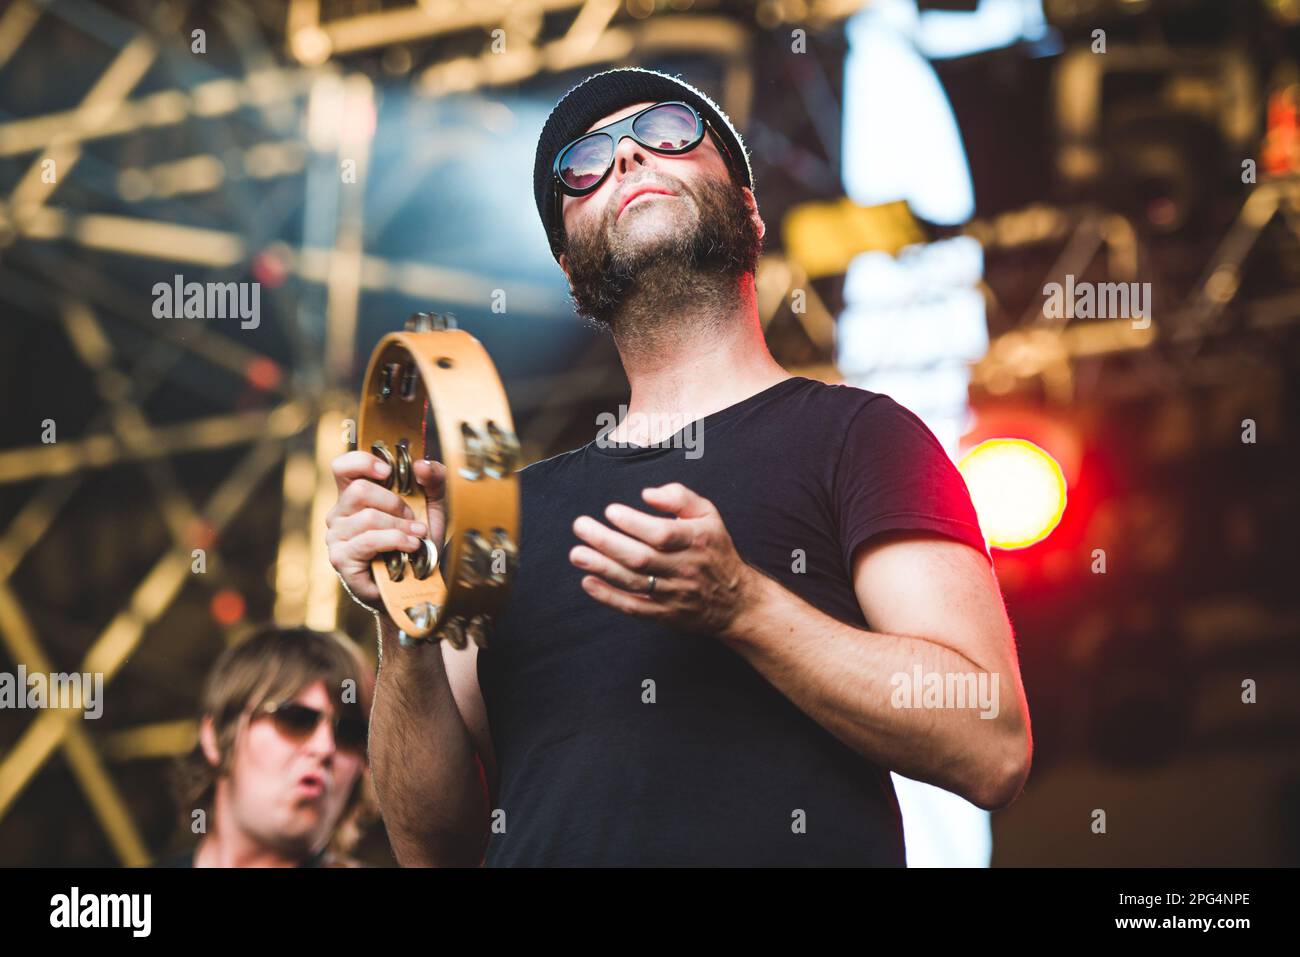 TODAYS Festival, TURIN, ITALY: Joel Gion, of the American psychedelic rock band called “The The Brian Jonestown Massacre” (BJM) performing live on stage at the Todays Festival held in Torino. Stock Photo